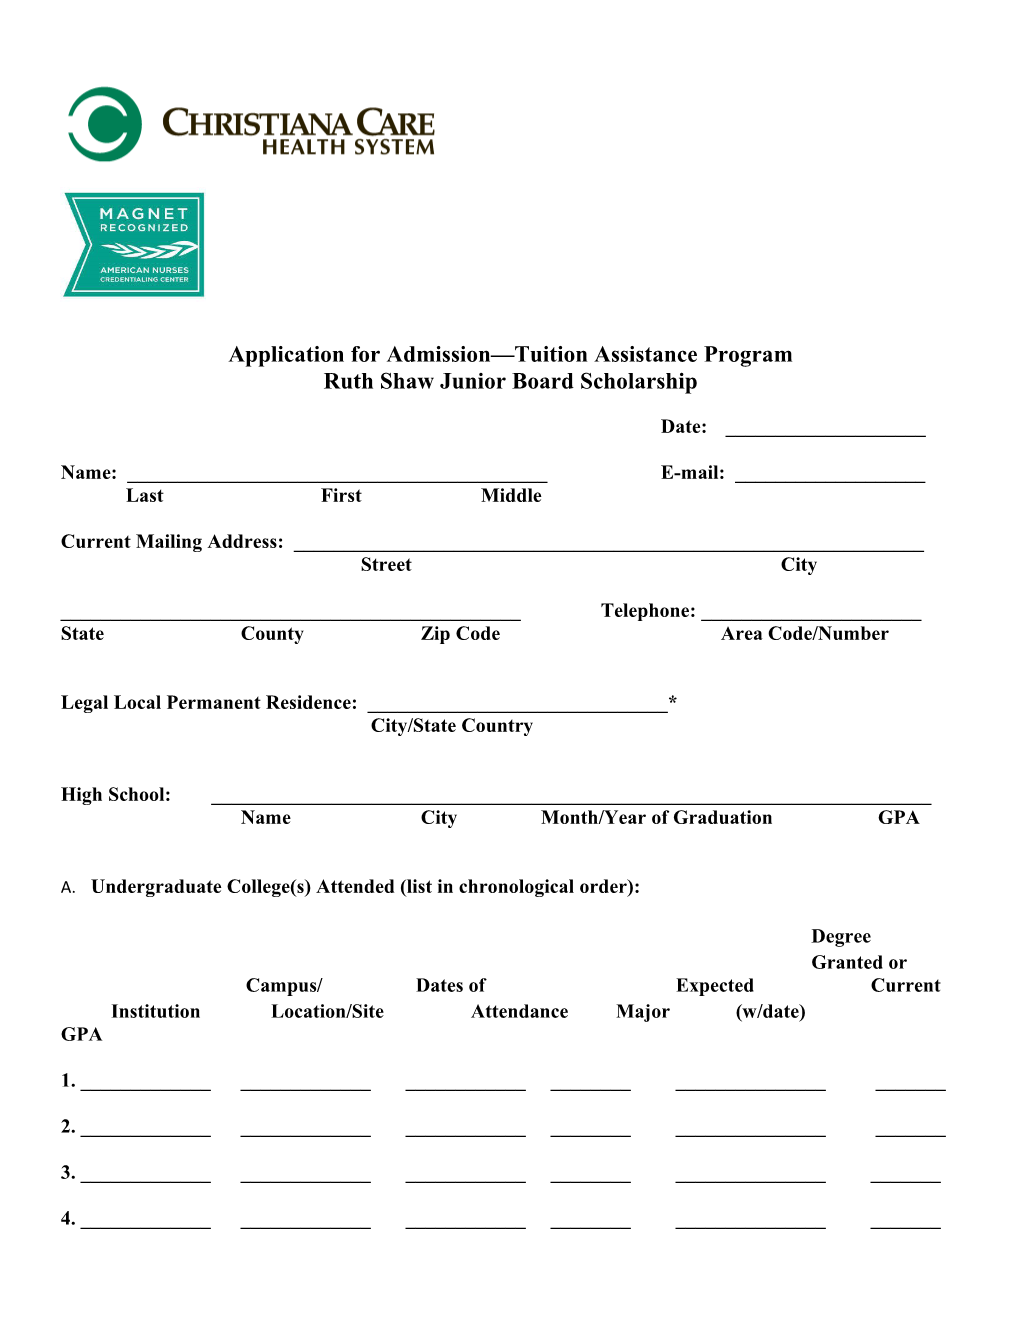 Application for Admission Tuition Assistance Program